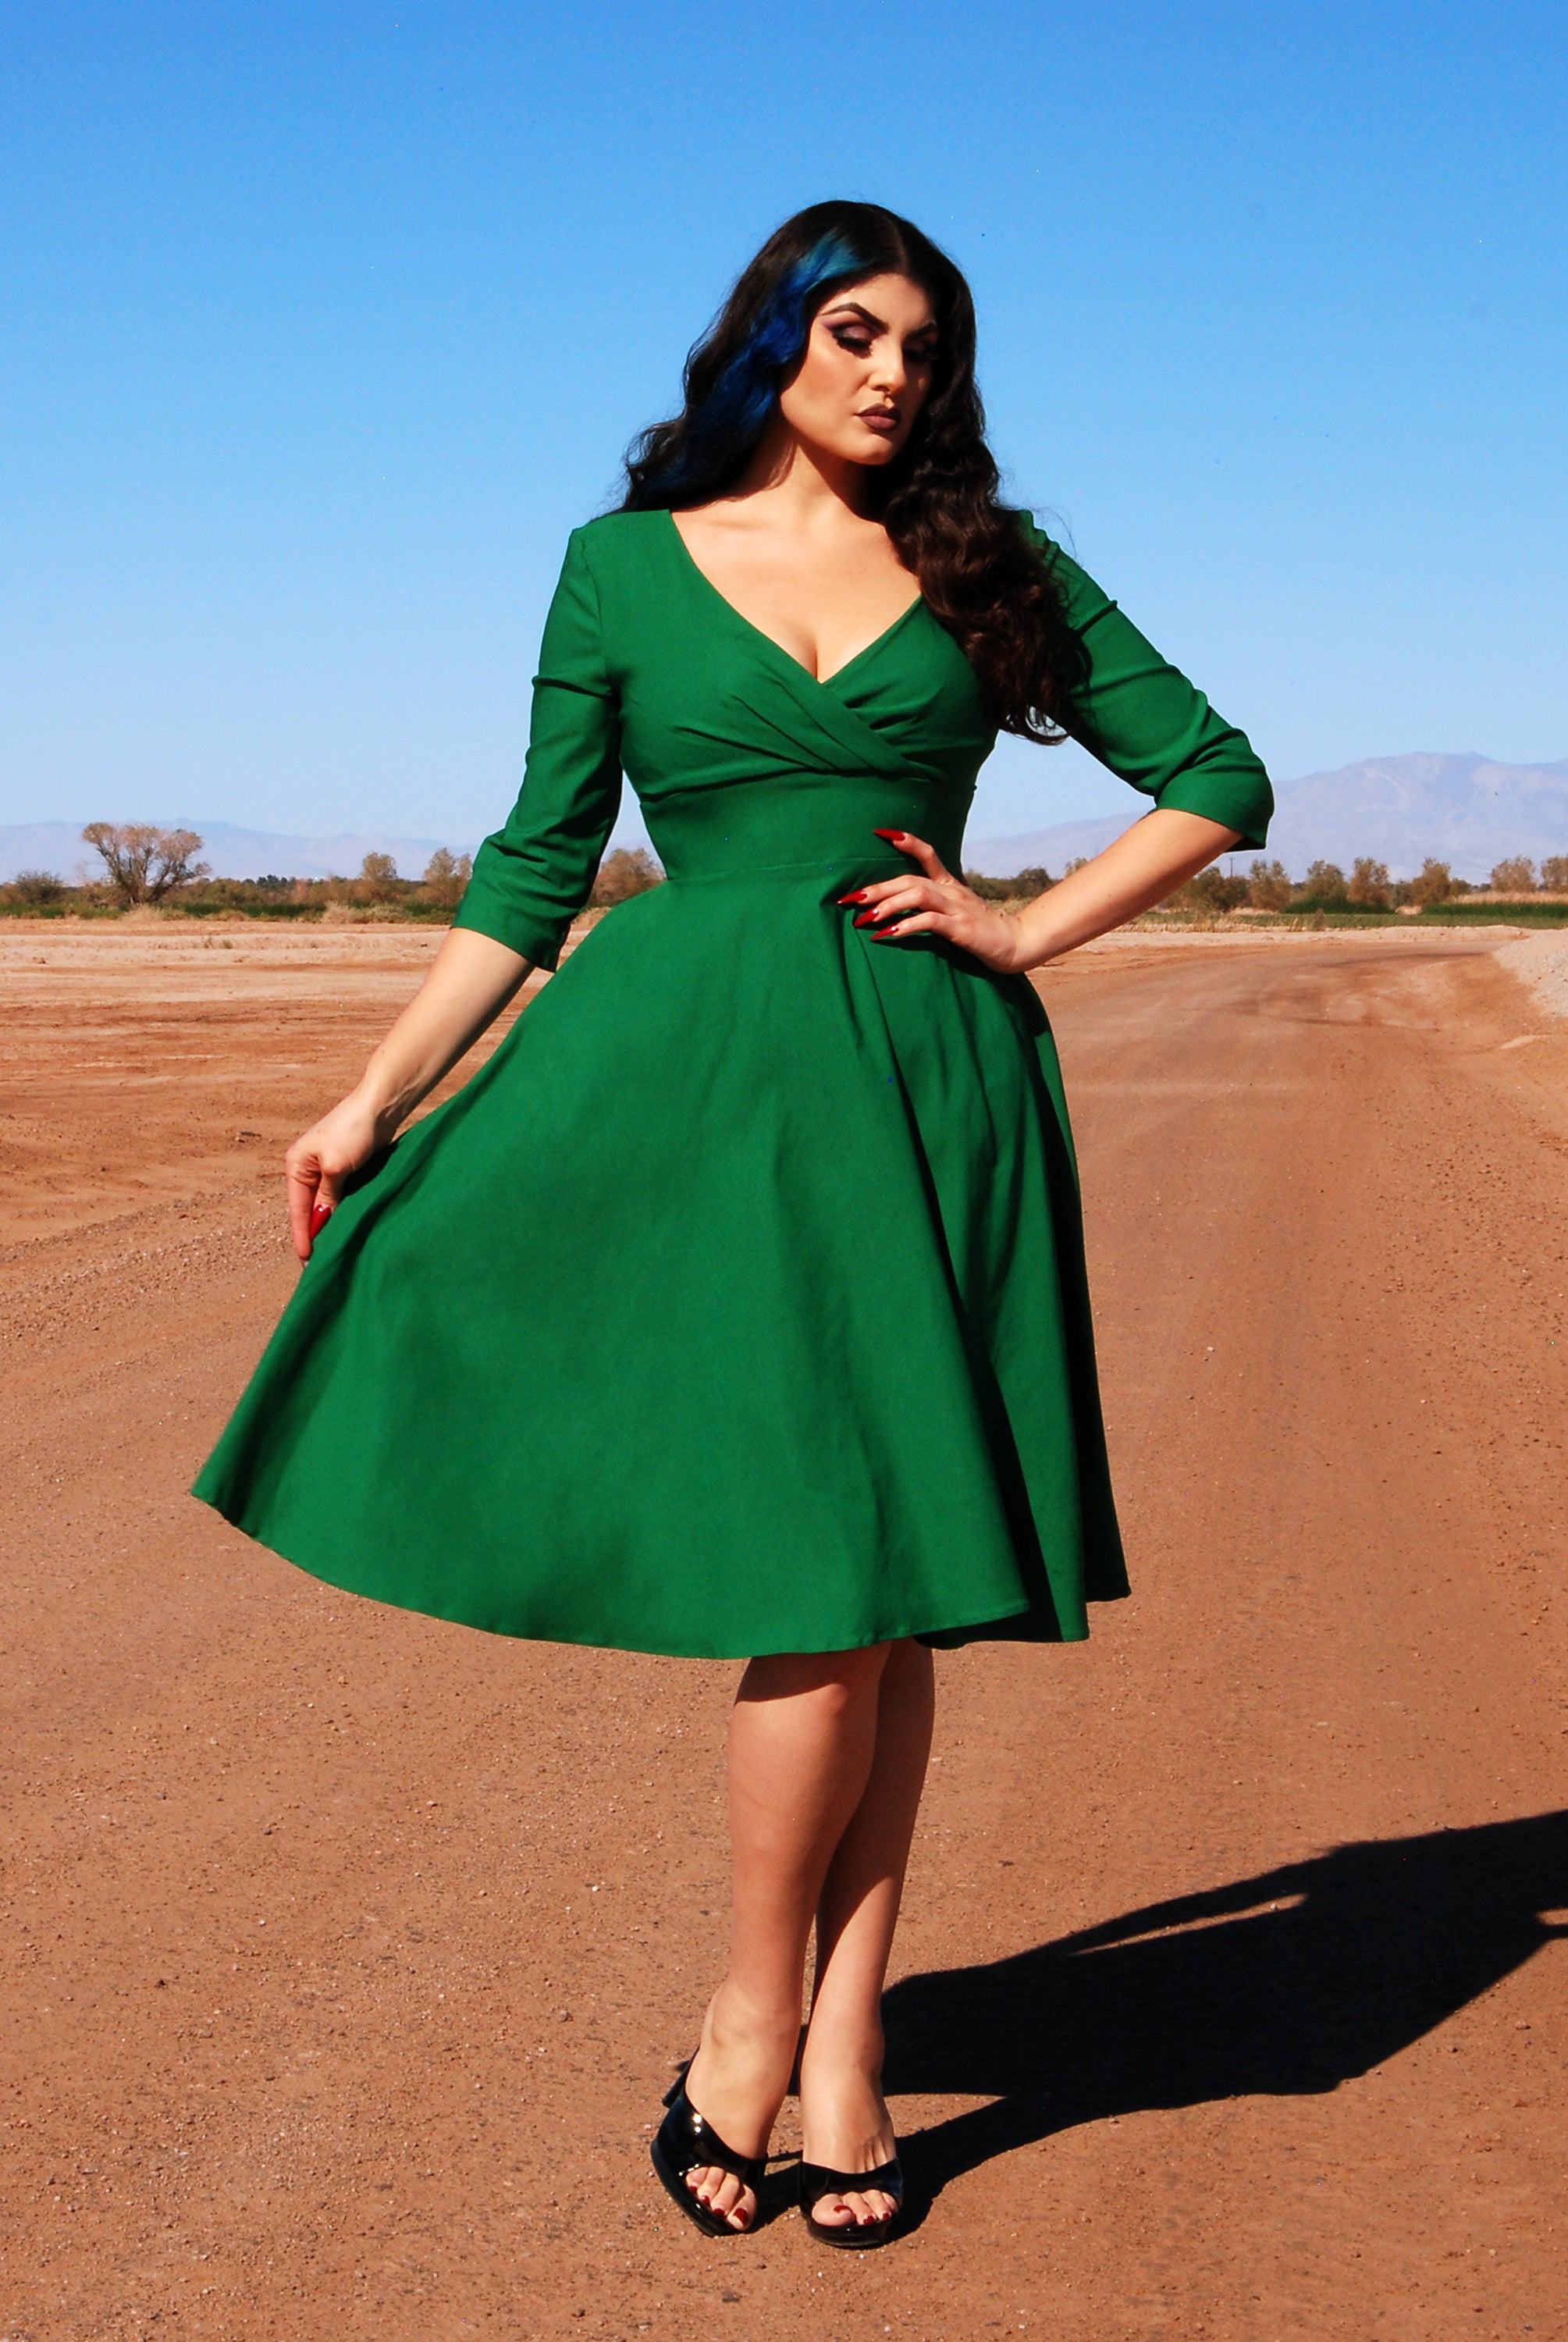 pin up clothing dresses